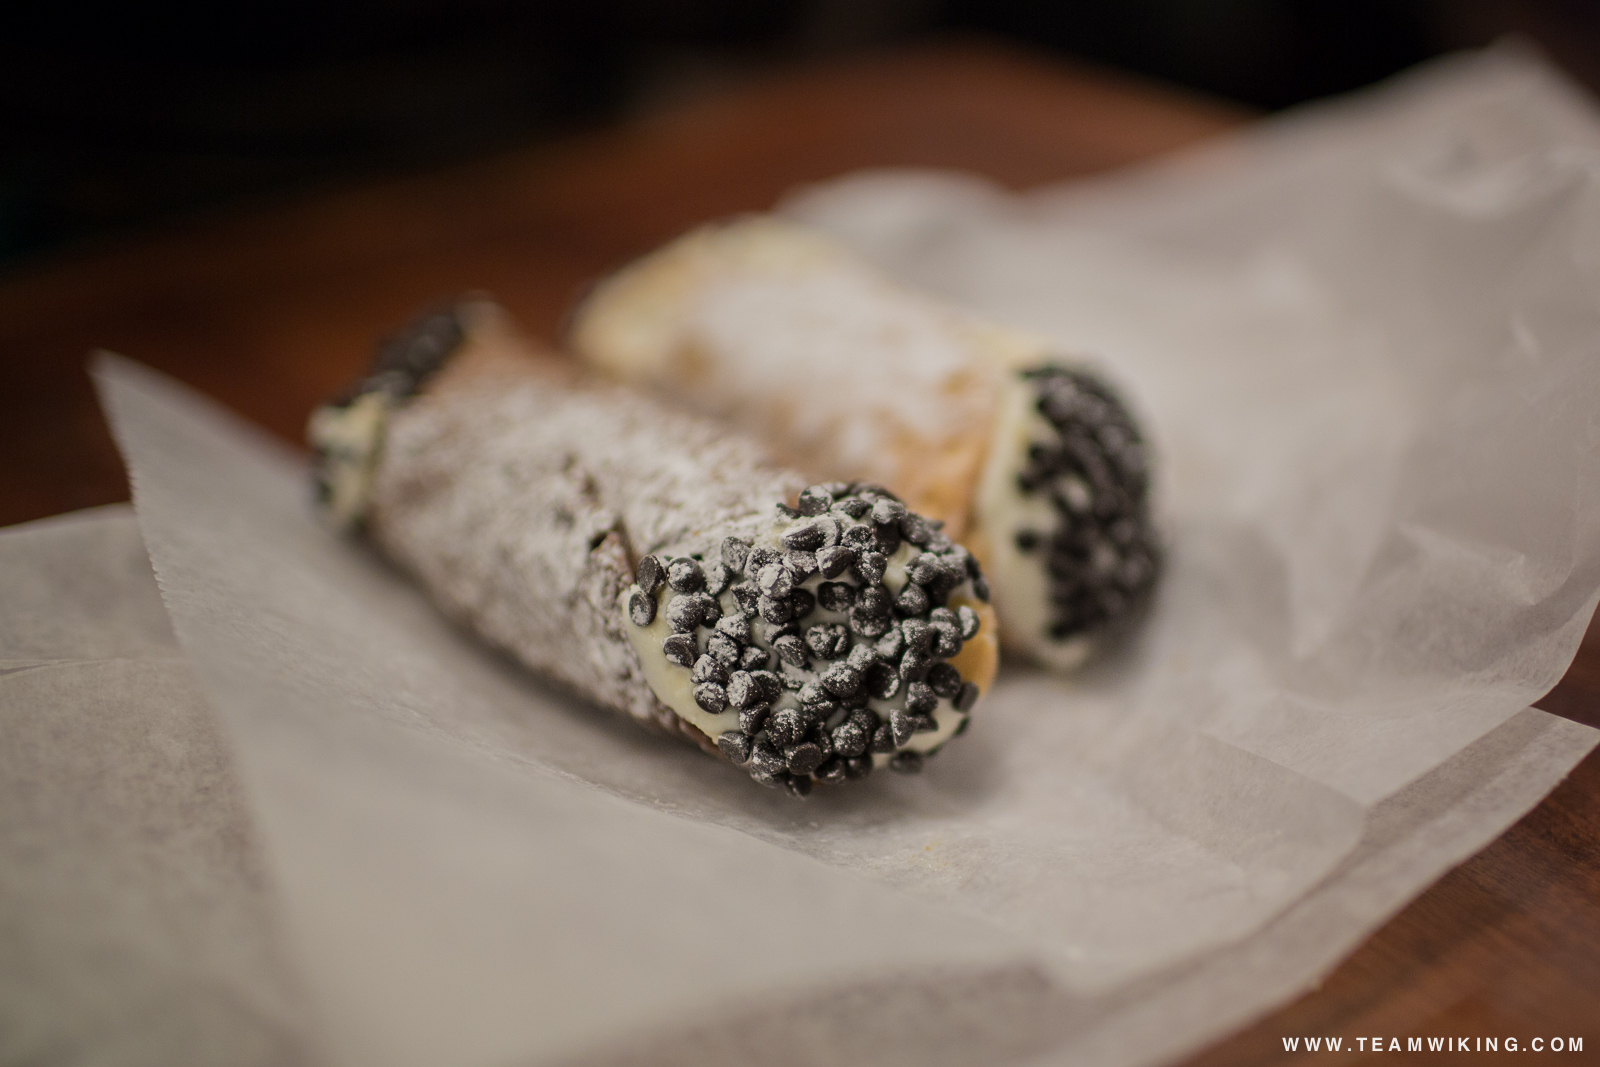 Cannoli from Mike's Pastry in Boston